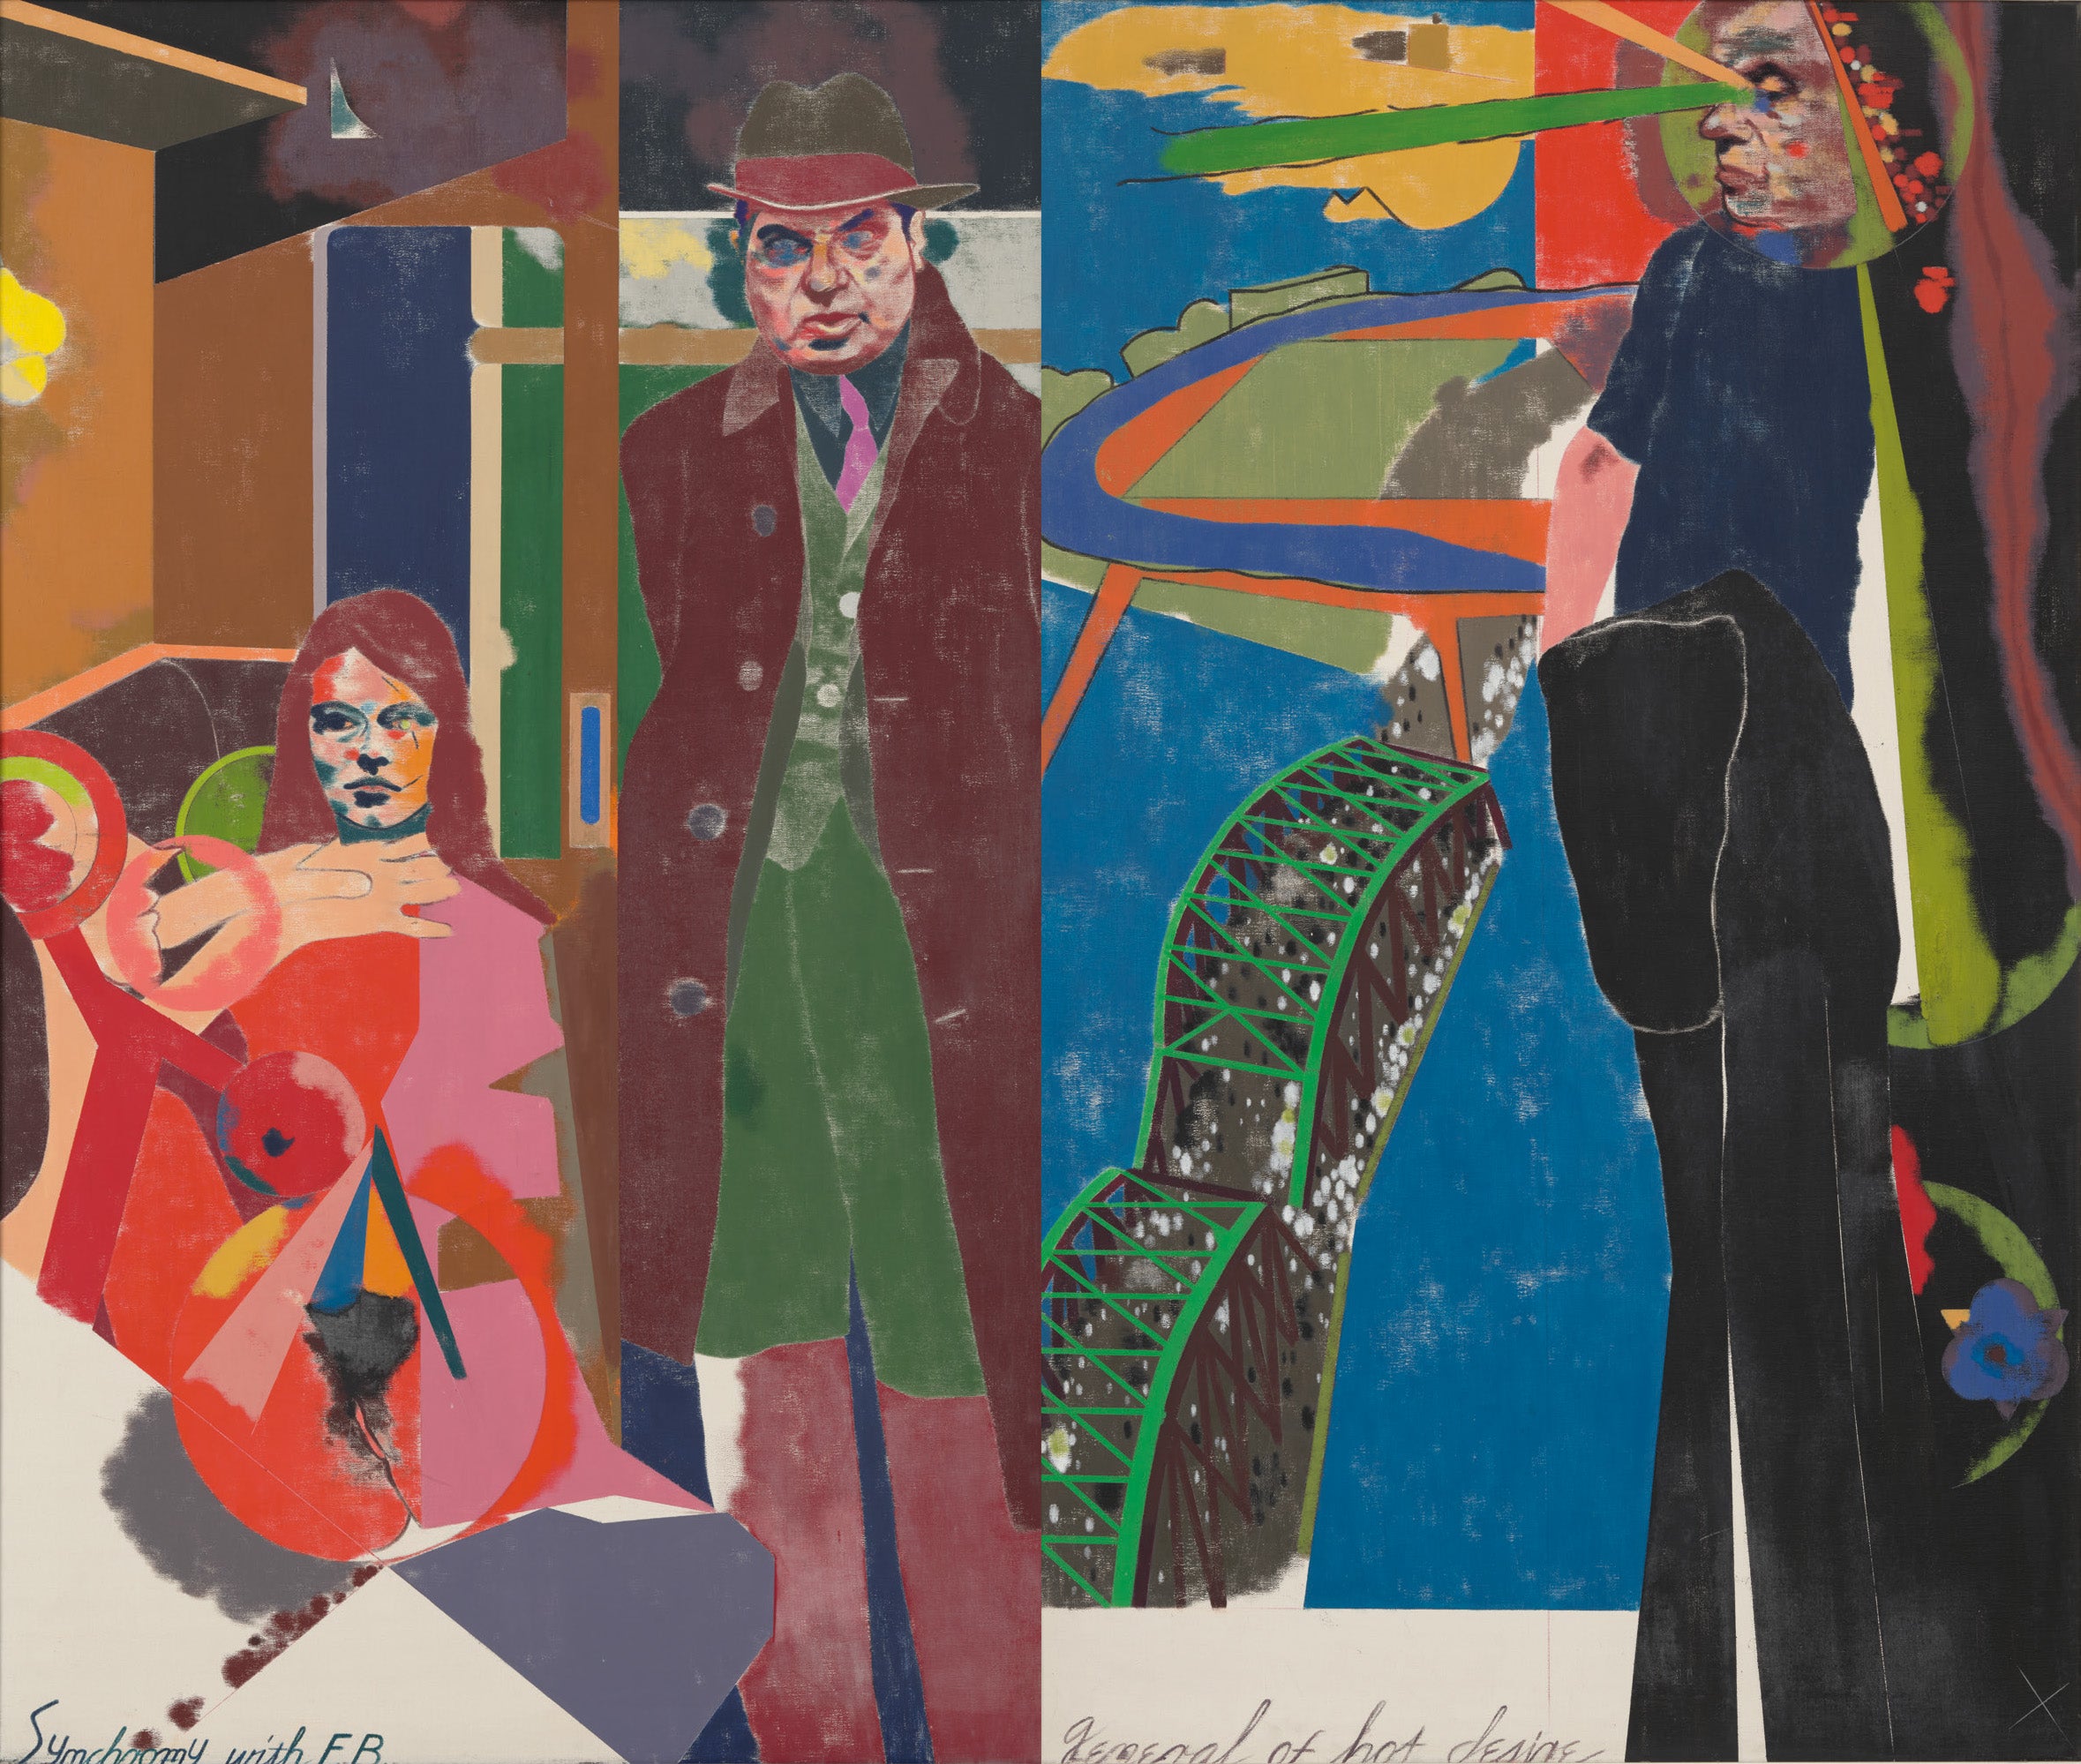 artists, rb kitaj: a brilliant, prickly outsider who stuck to his artistic guns no matter what